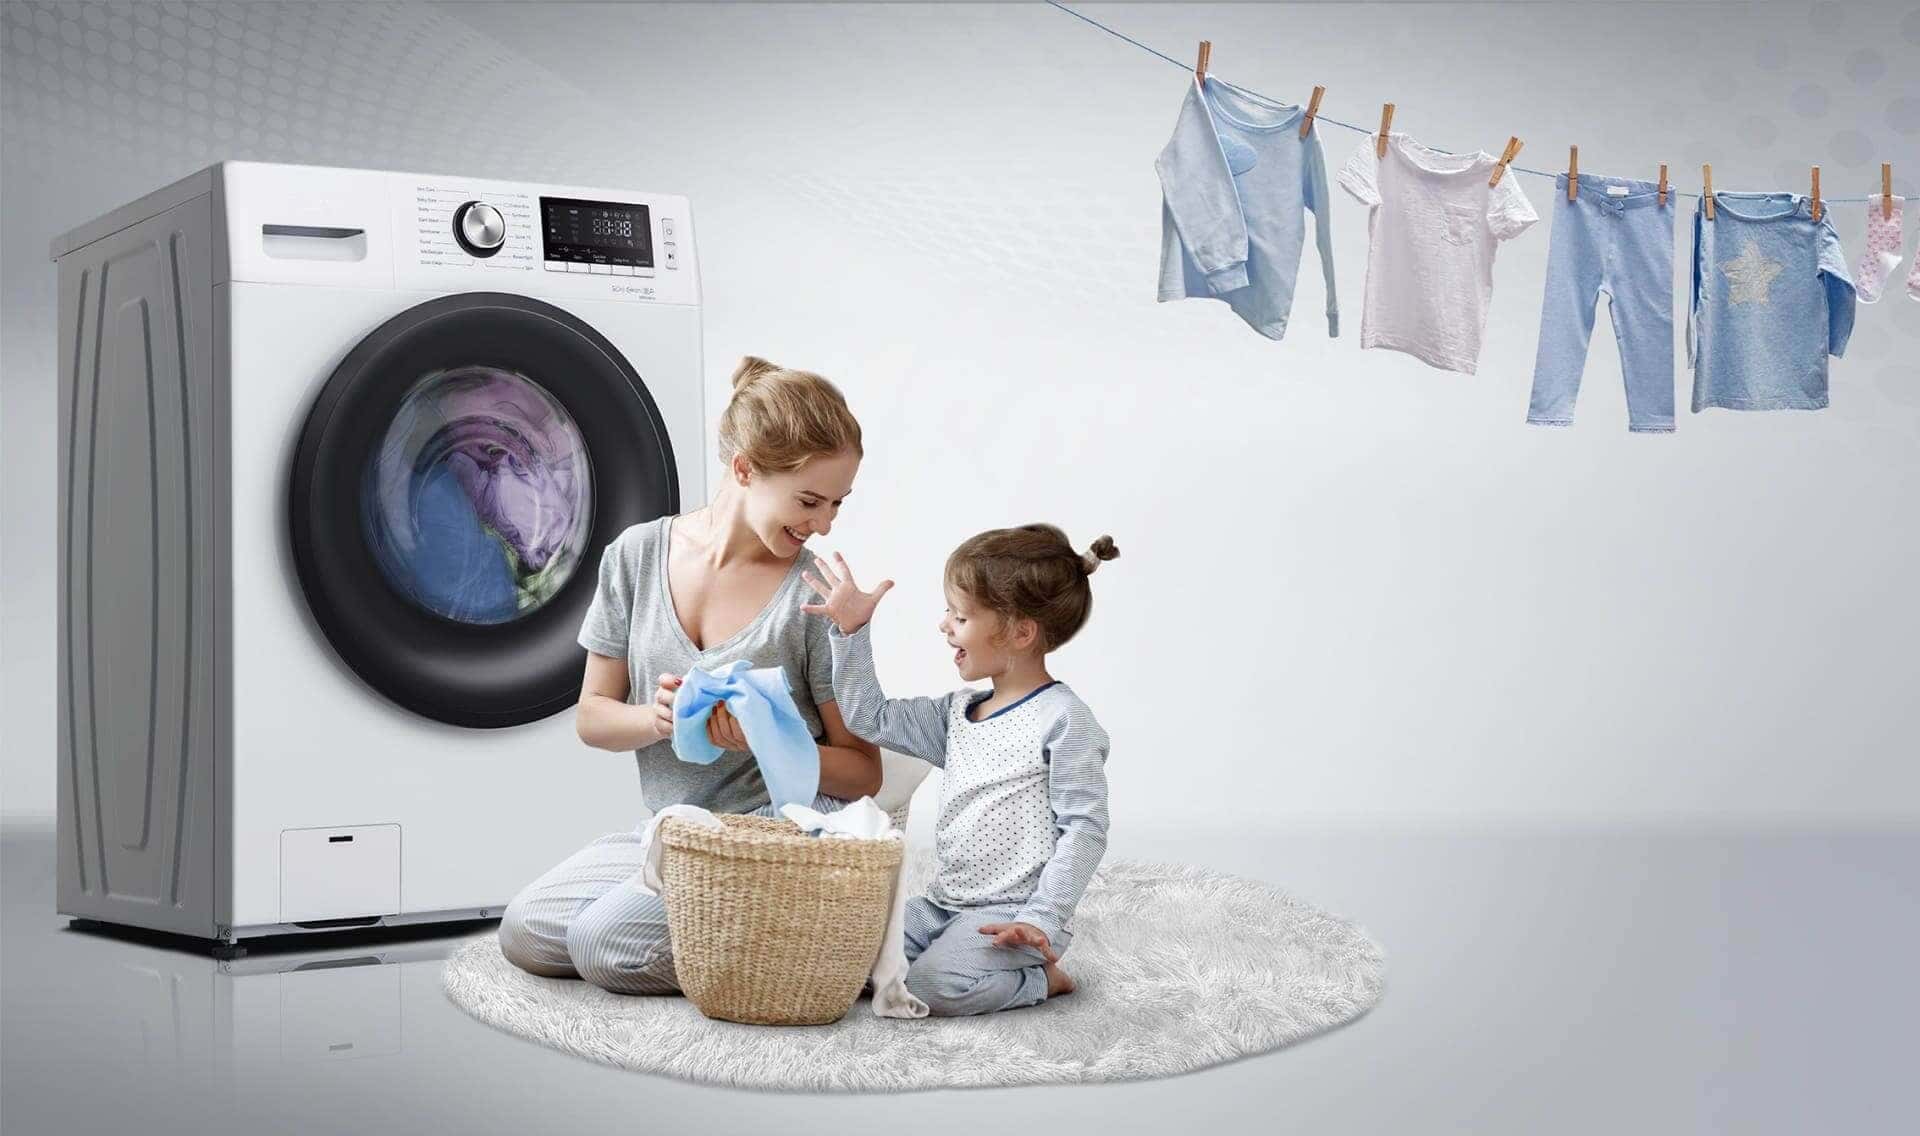 
Smad 6Kg Automatic Front Loader Washing Machine with Child Lock